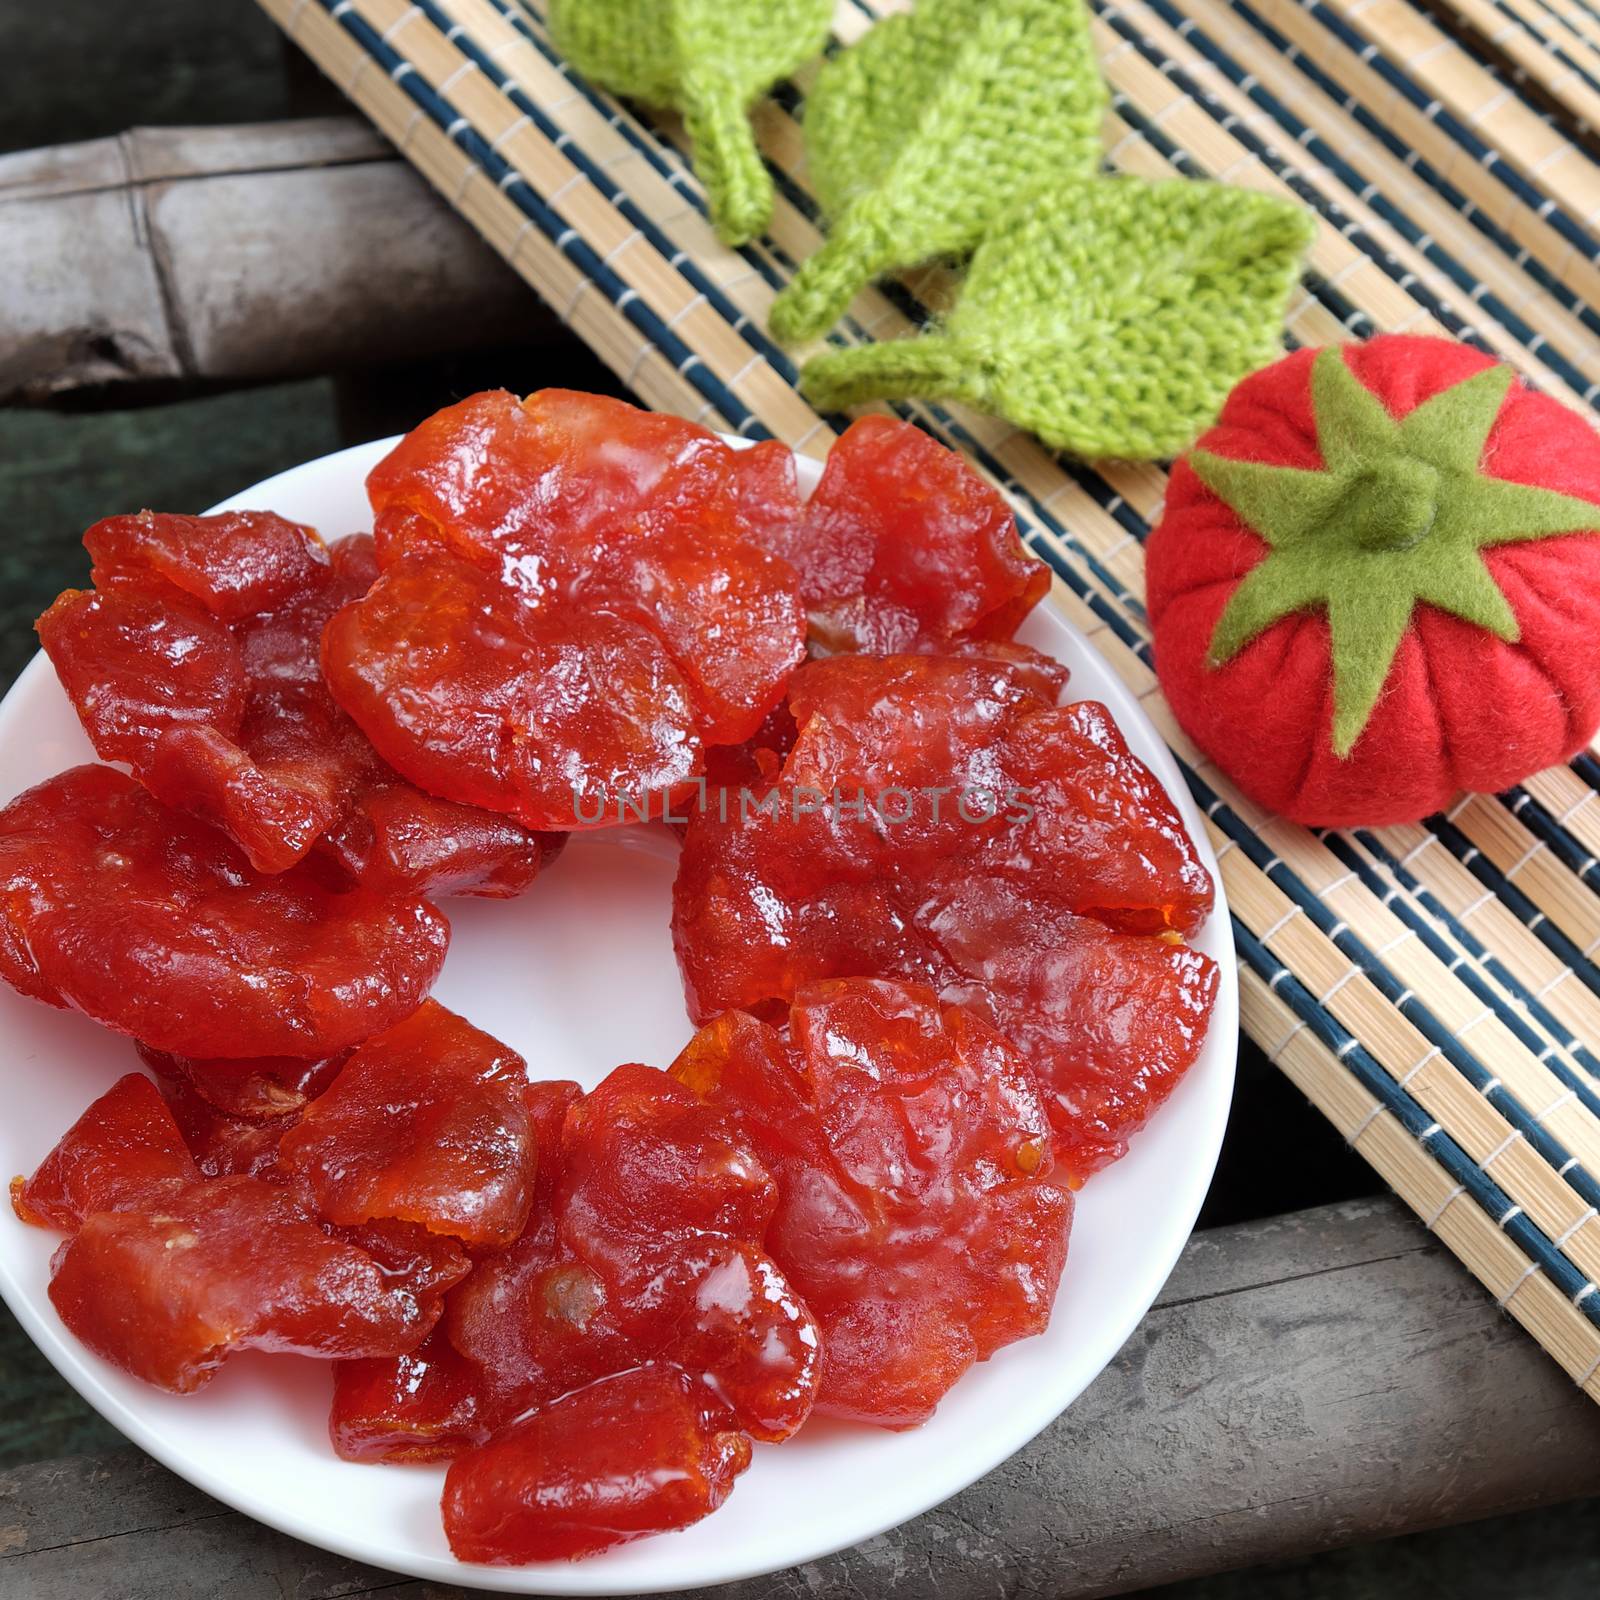 Vietnamese food for Tet holiday in spring, tomato jam, sweet eating is traditional food on lunar new year, can make from tomato cook with sugar,  amazing background for Vietnam custom